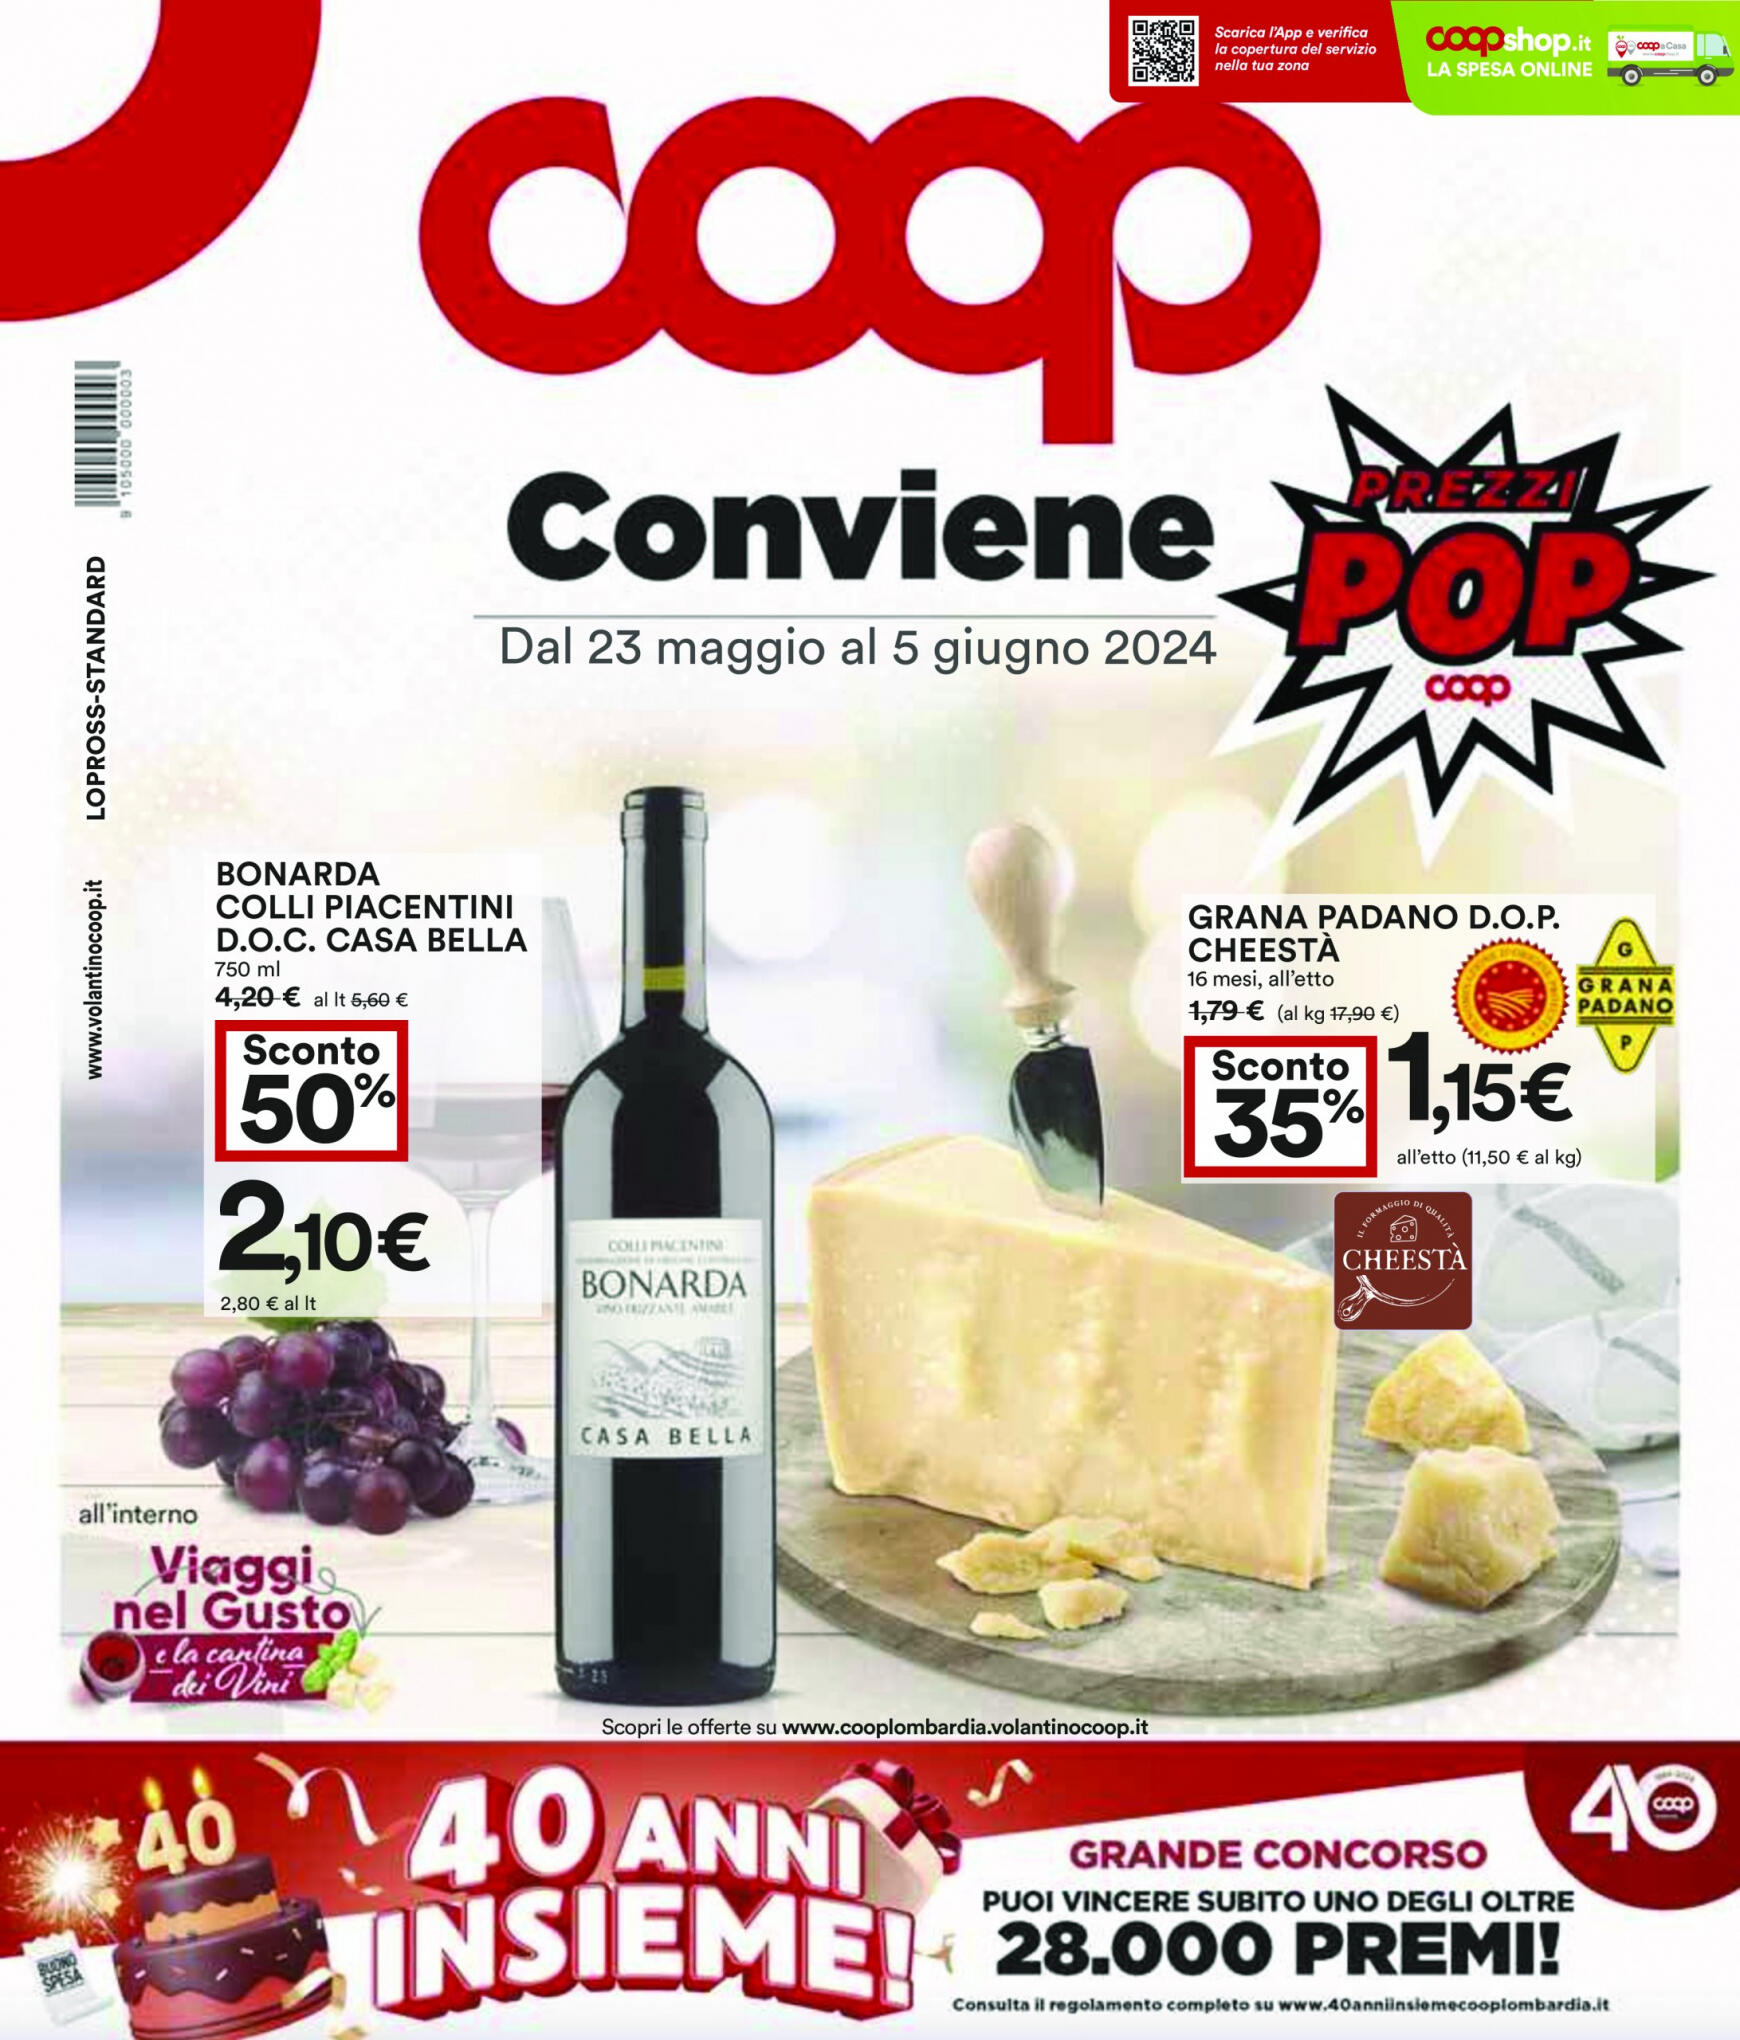 coop - Nuovo volantino Coop 23.05. - 05.06. - page: 1